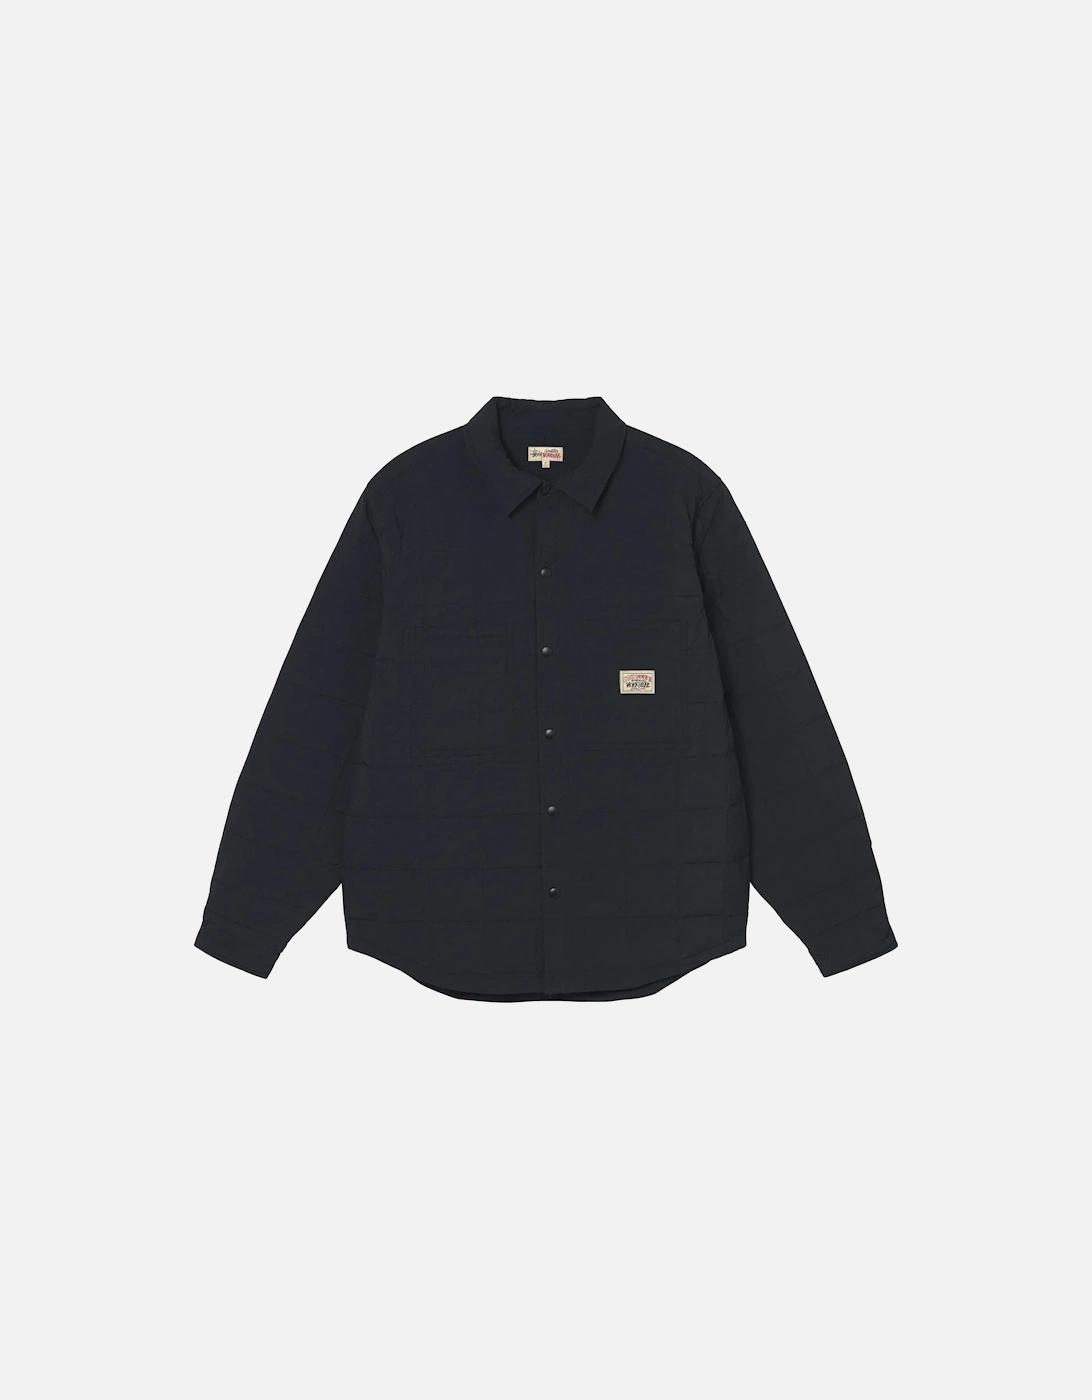 Stüssy quilted fatigue shirt - Black, 2 of 1